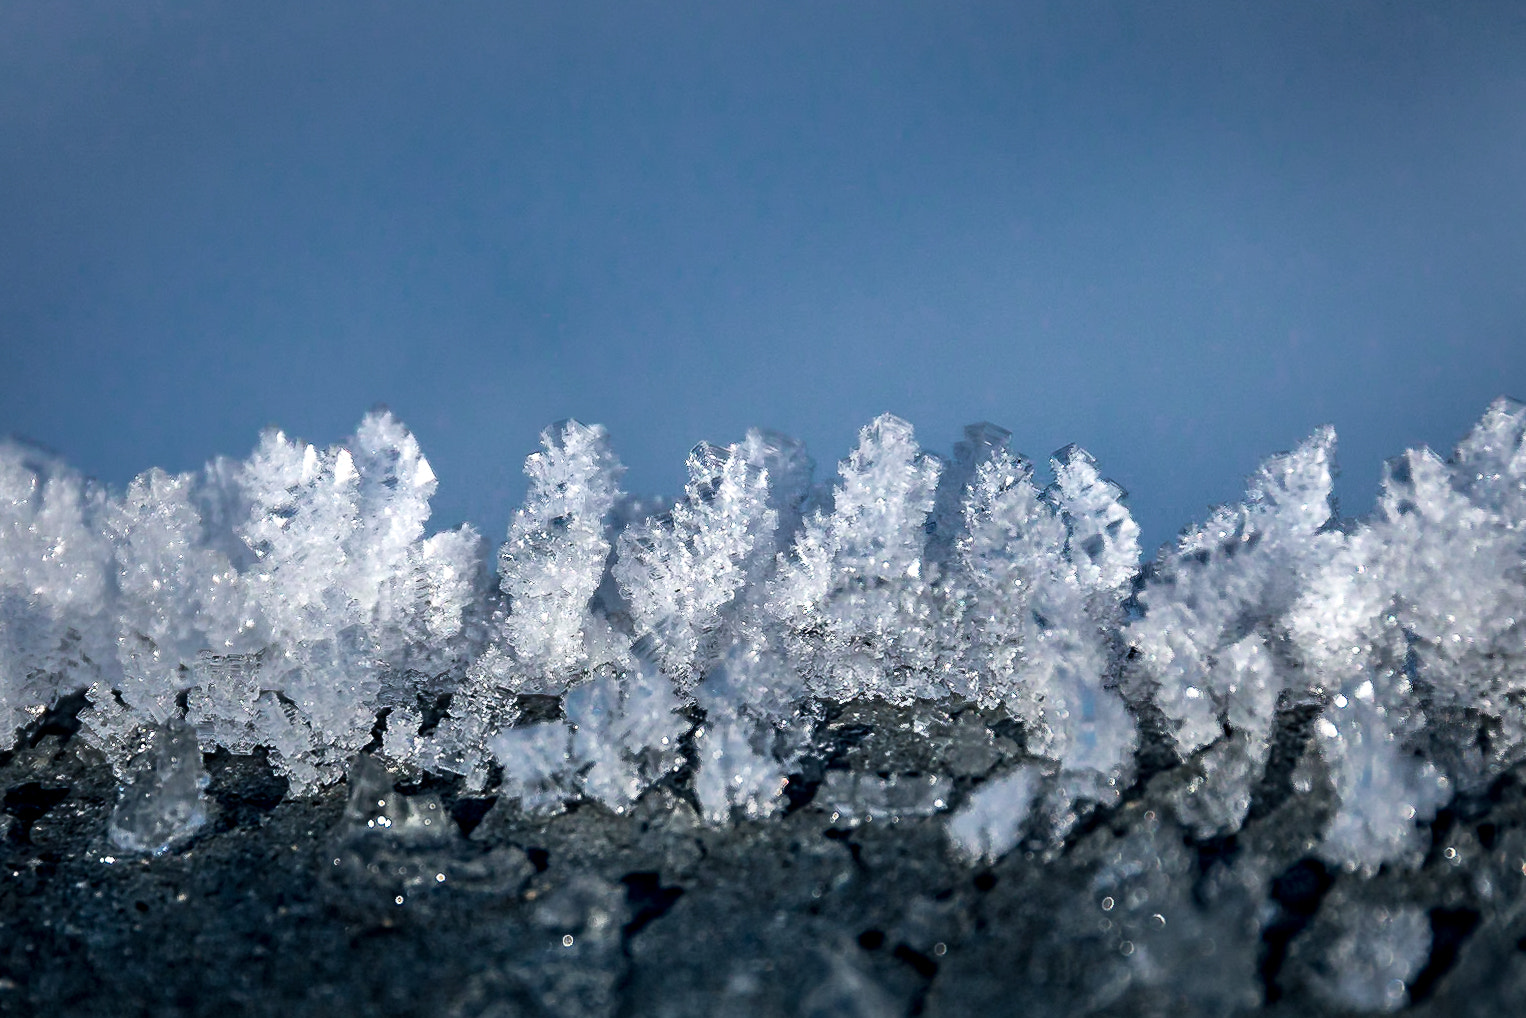 Canon EOS 70D + Sigma 24-105mm f/4 DG OS HSM | A sample photo. Ice cristals photography